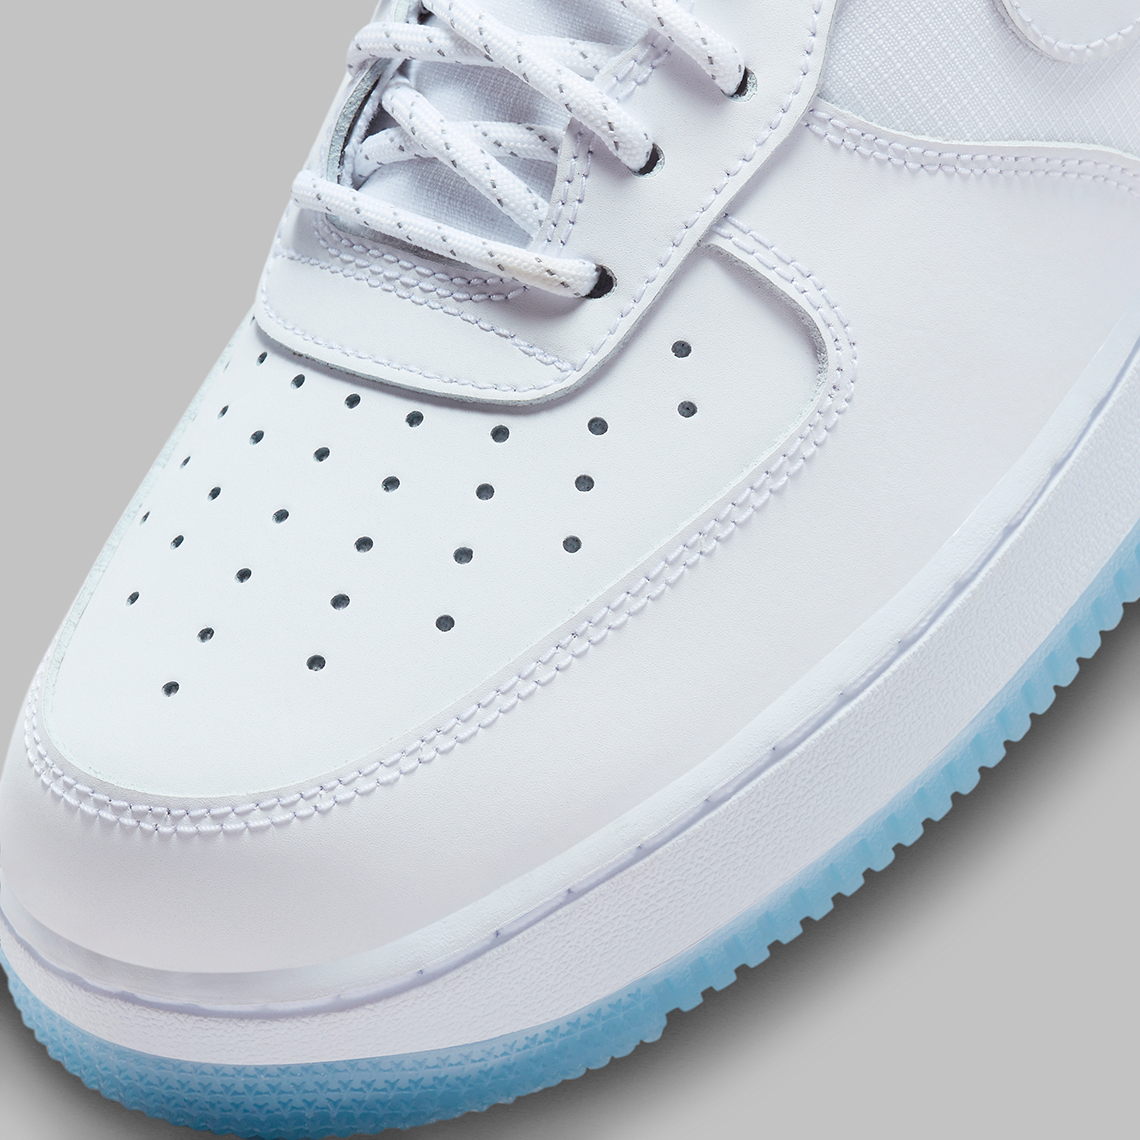 Nike Air Force 1 Low White Icy Soles Fv0383 100 6